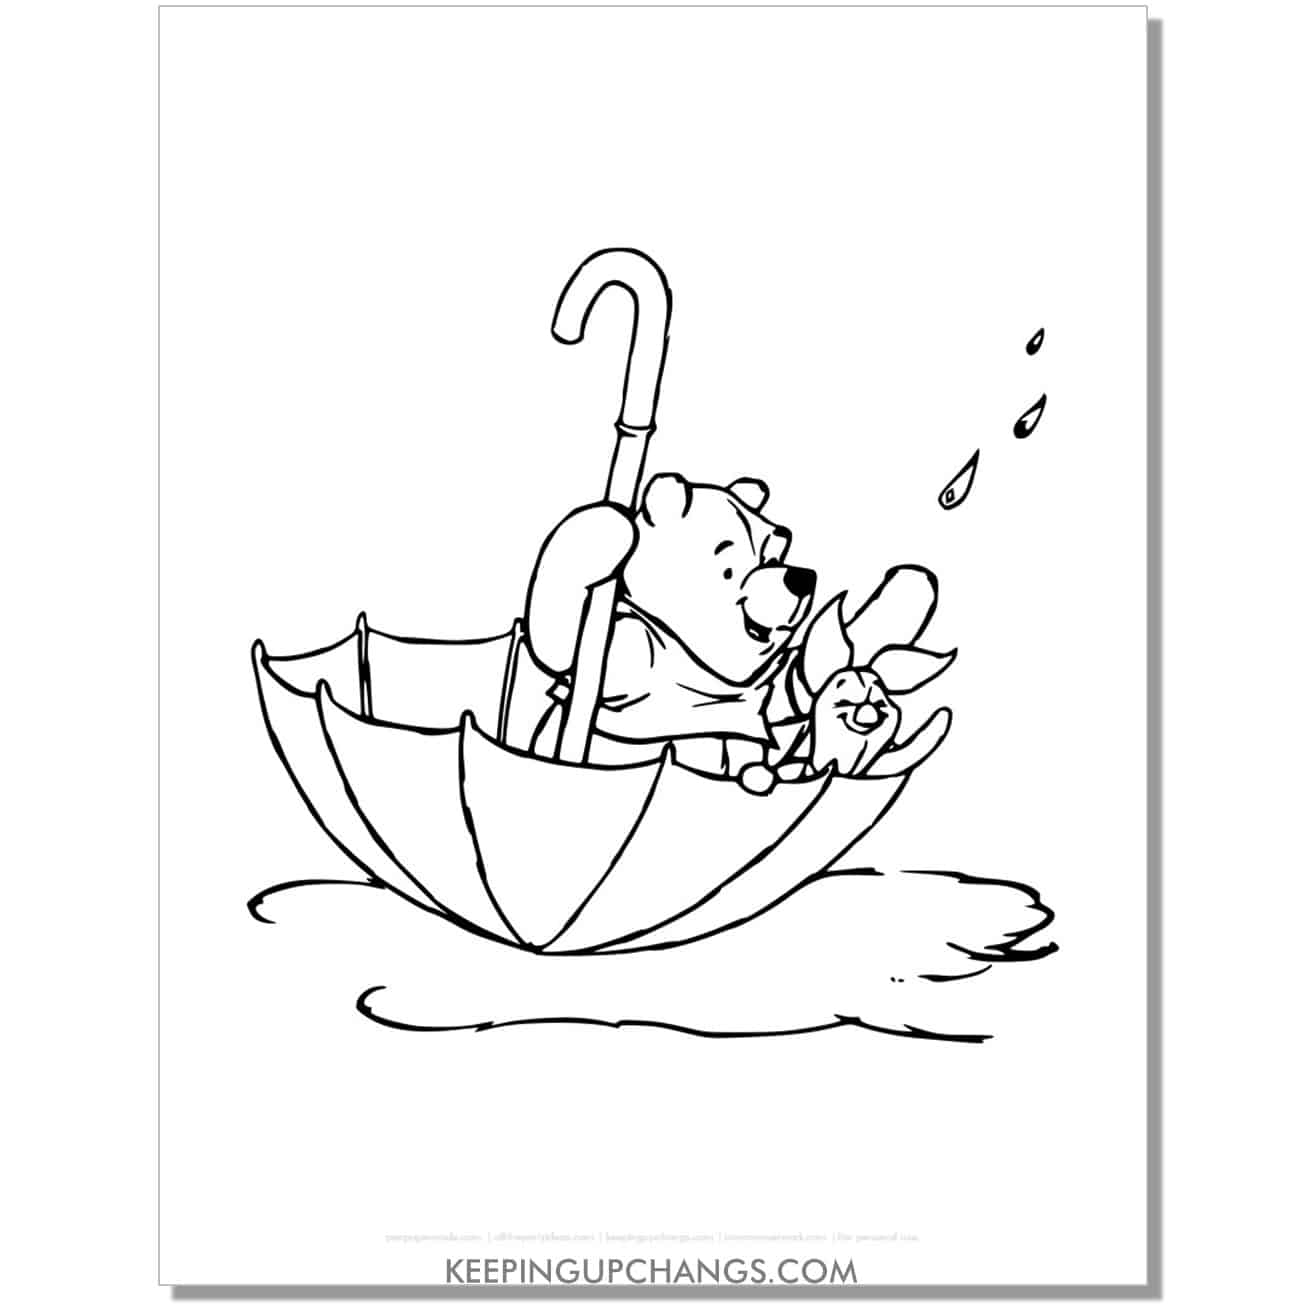 winnie the pooh and piglet in upside down umbrella coloring page, sheet.